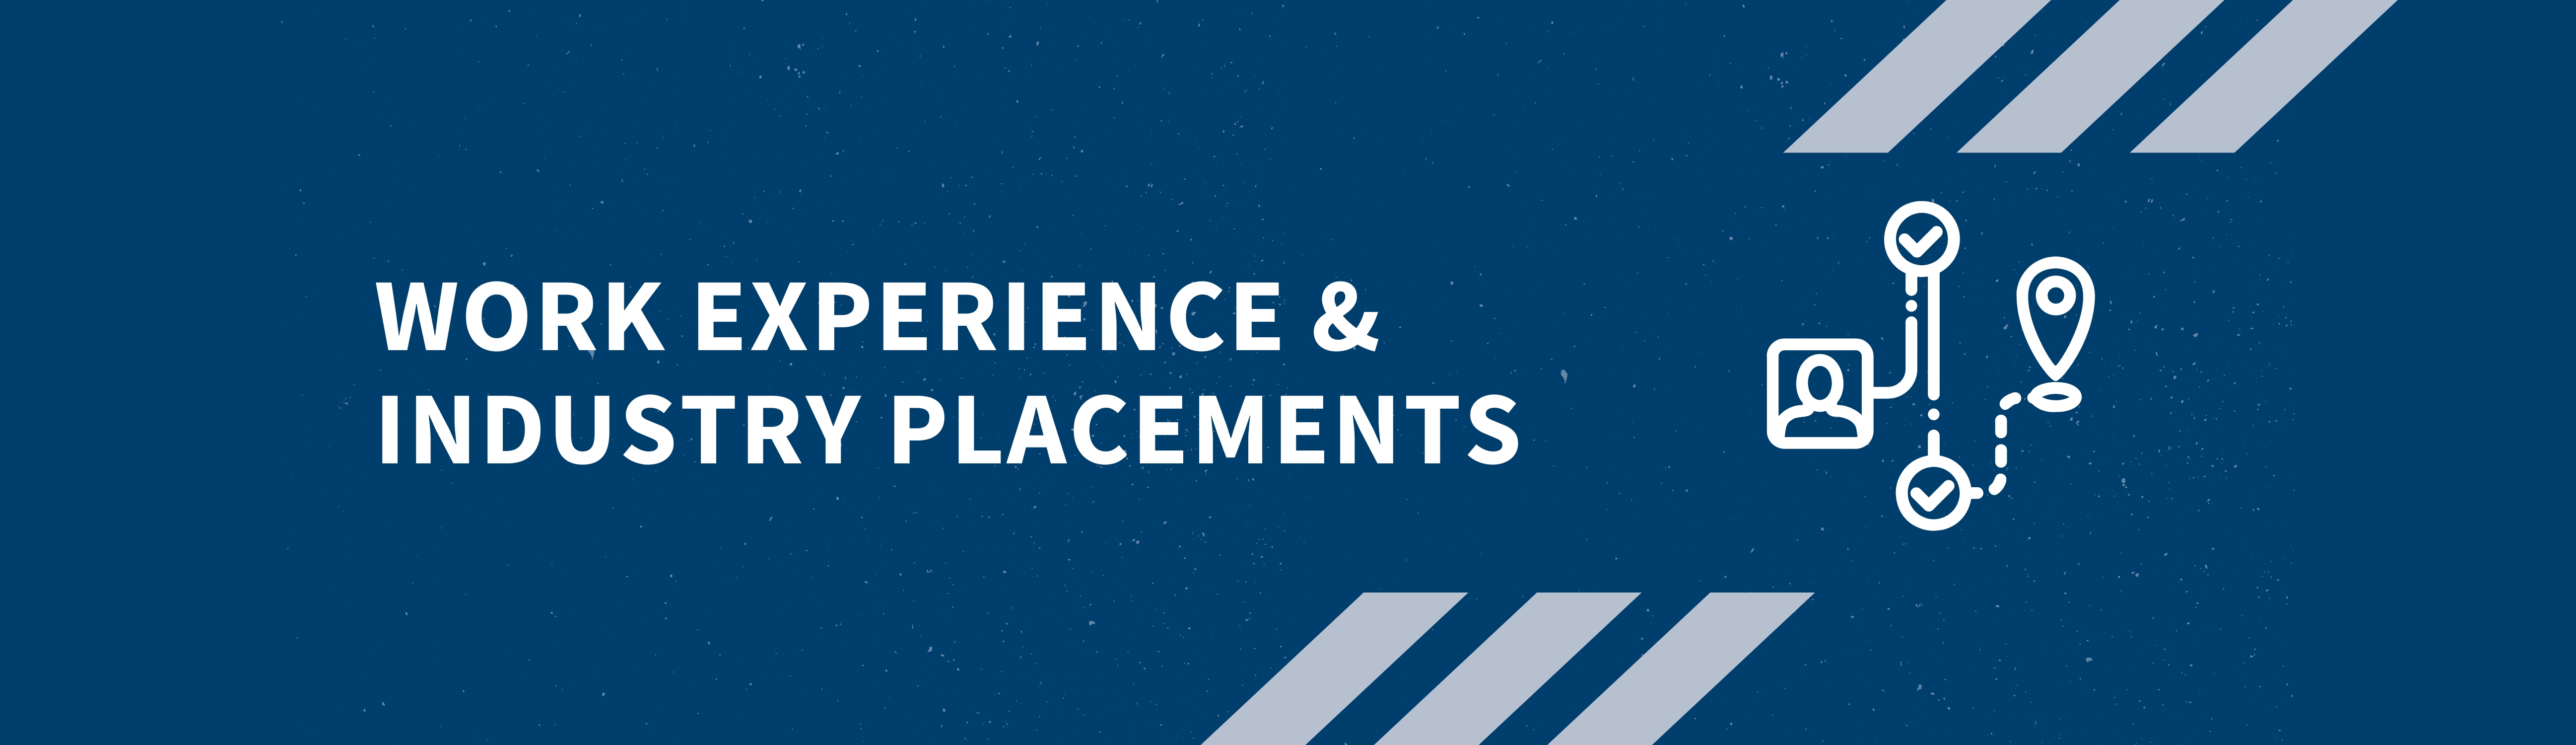 Work experience and industry placements banner